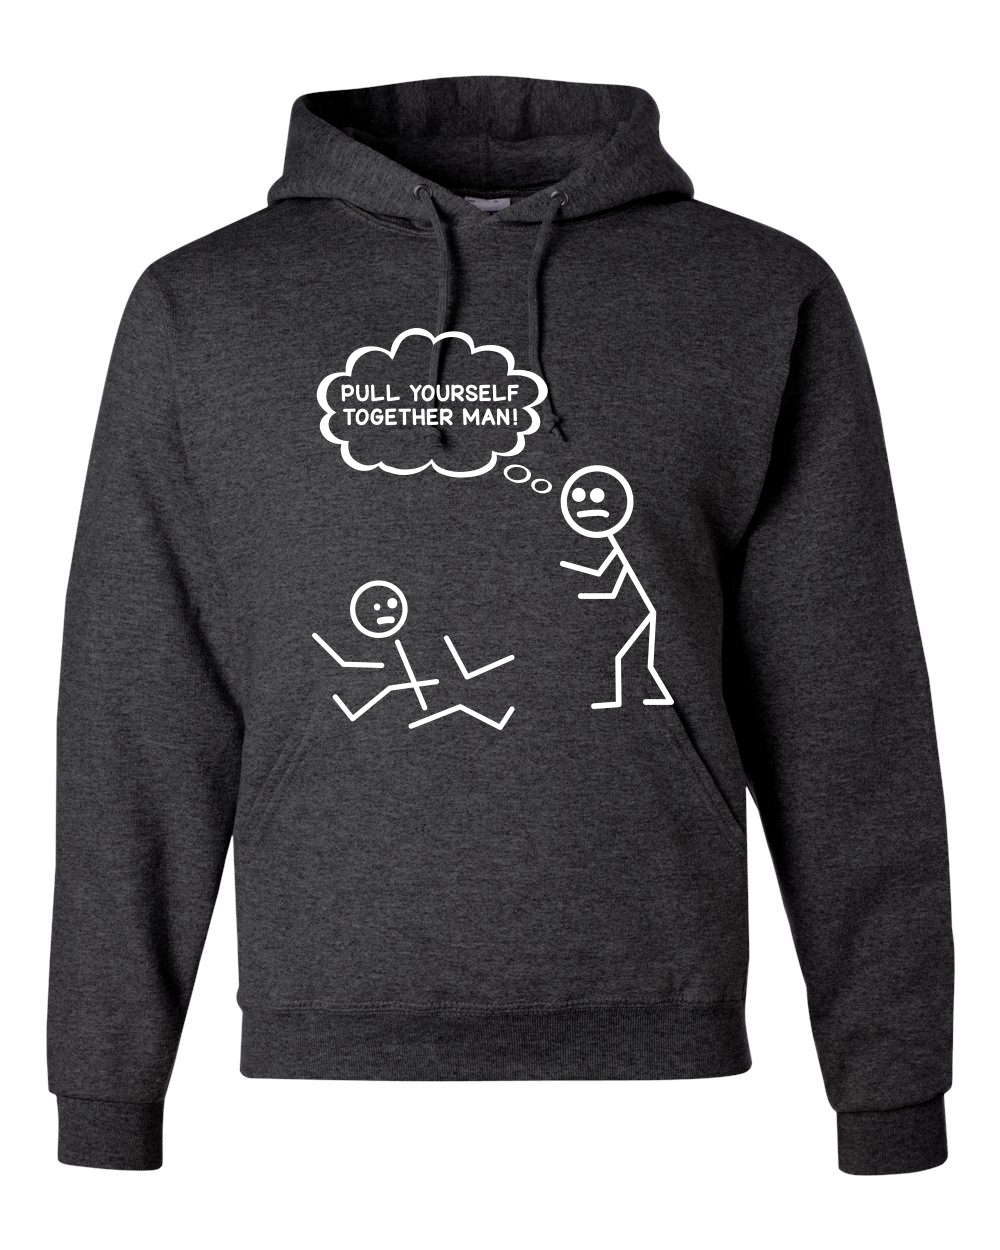 Born To Game Funny Novelty Hoodie Hoody hooded Top 